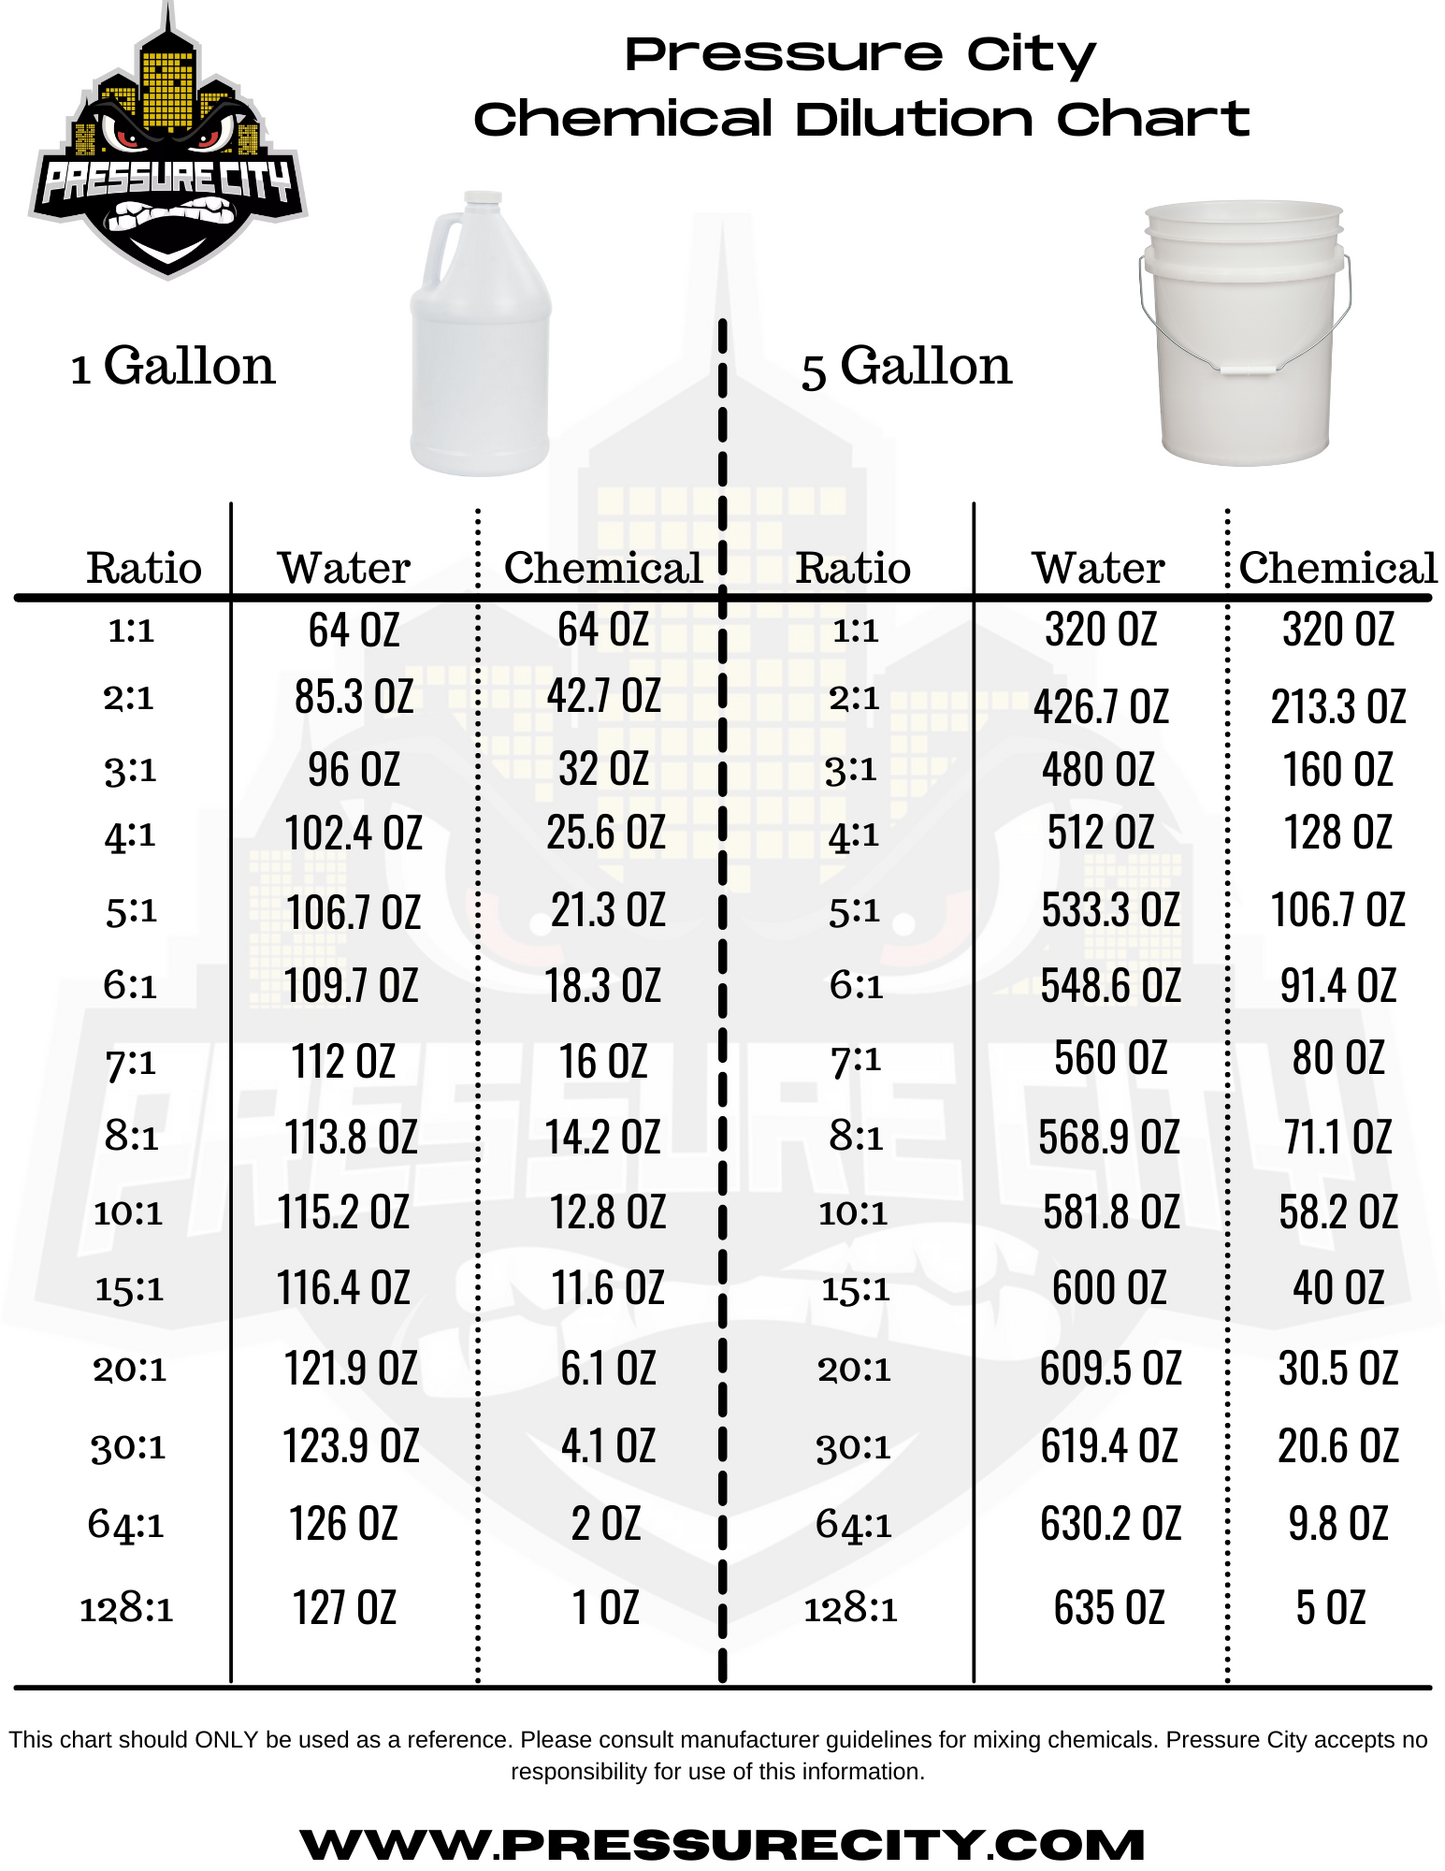 Chemical dilution chart